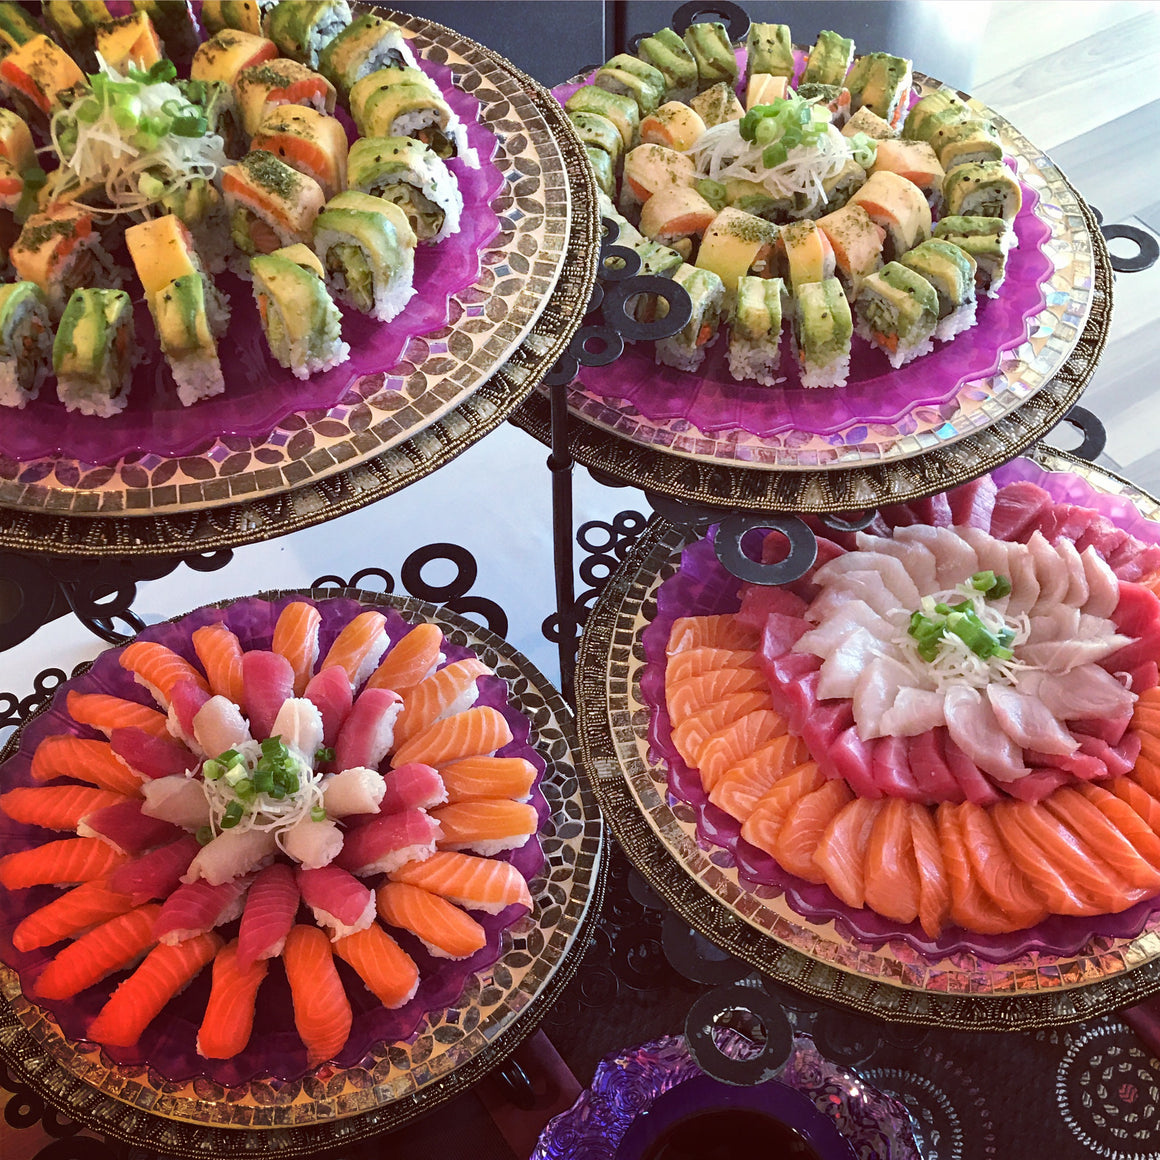 Wedding Reception - Passed Appetizers & Appetizer Buffet/Stations Full Service